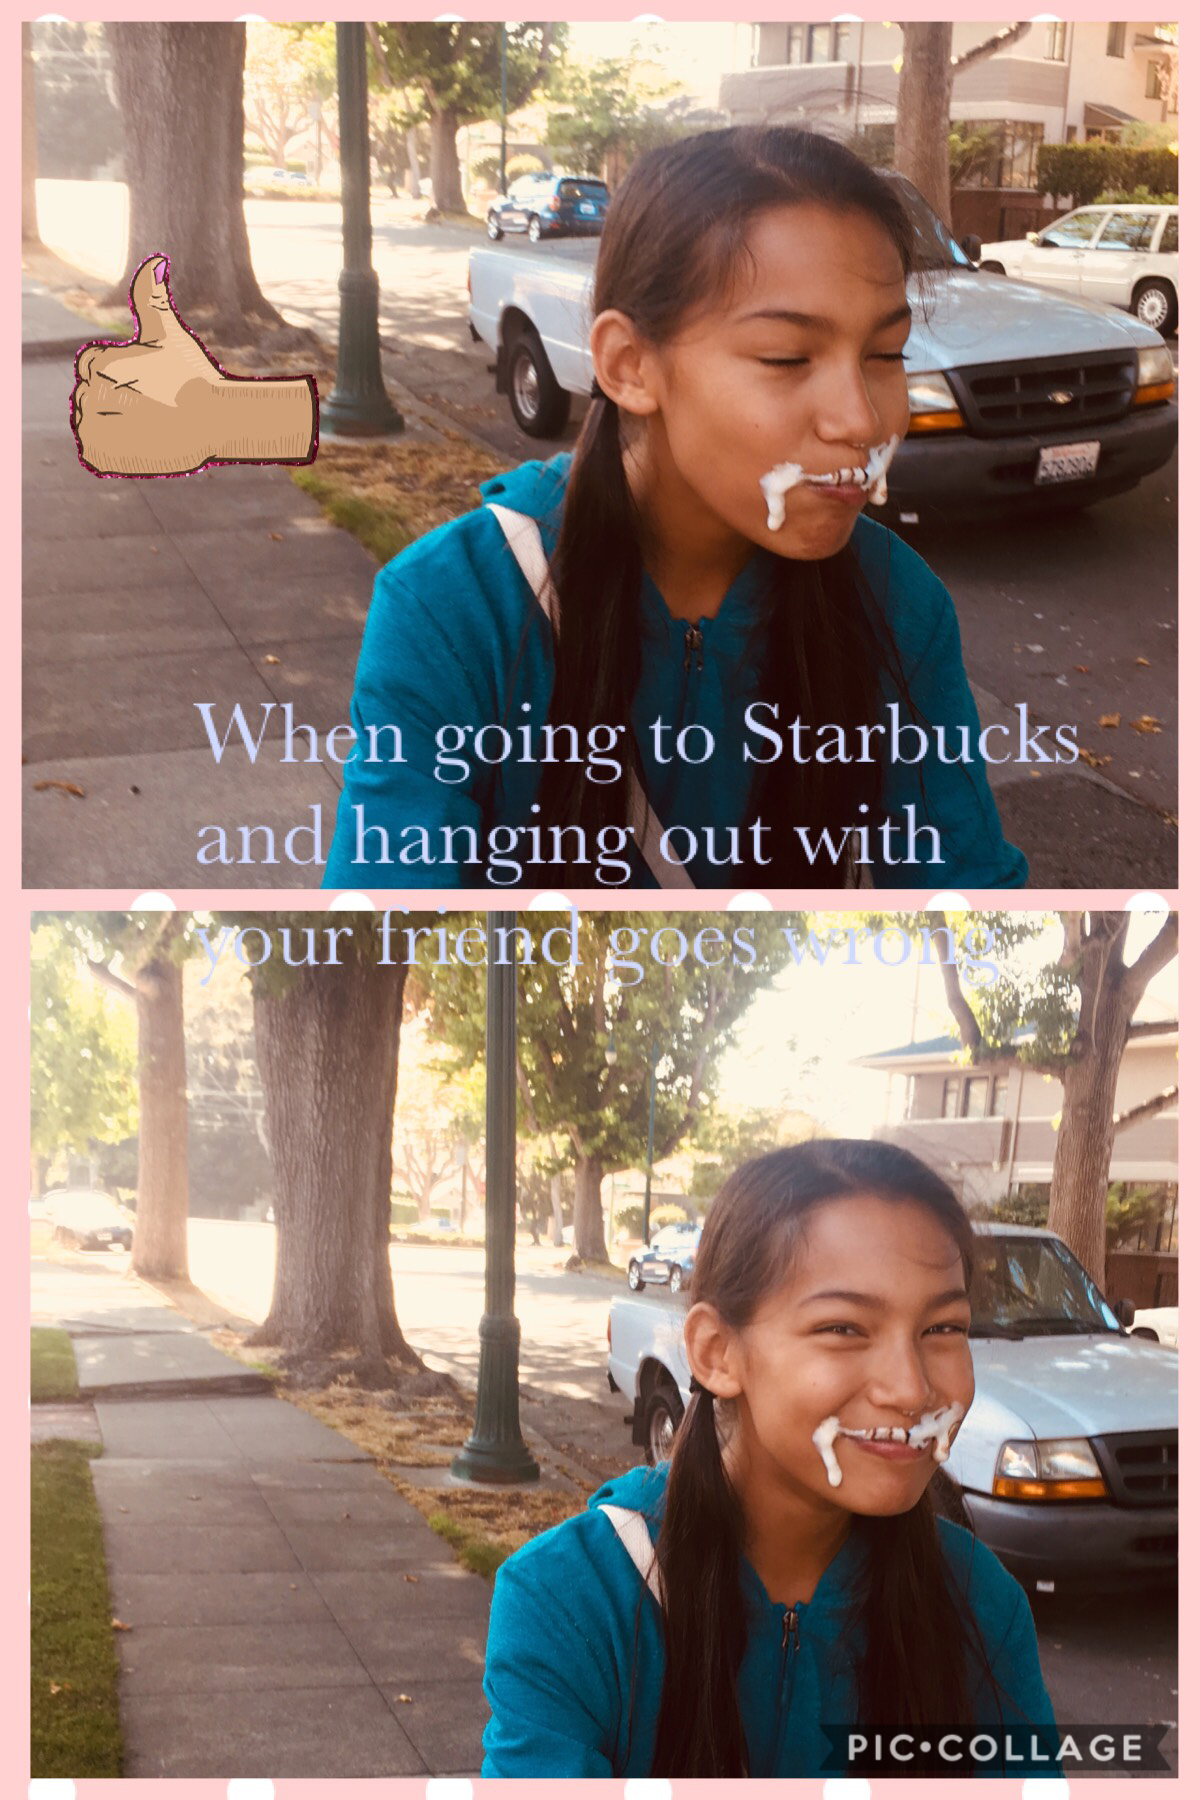 Starbucks gave her the wrong size lid for her cup ... she squeezed it and the whipped cream exploded on her face 